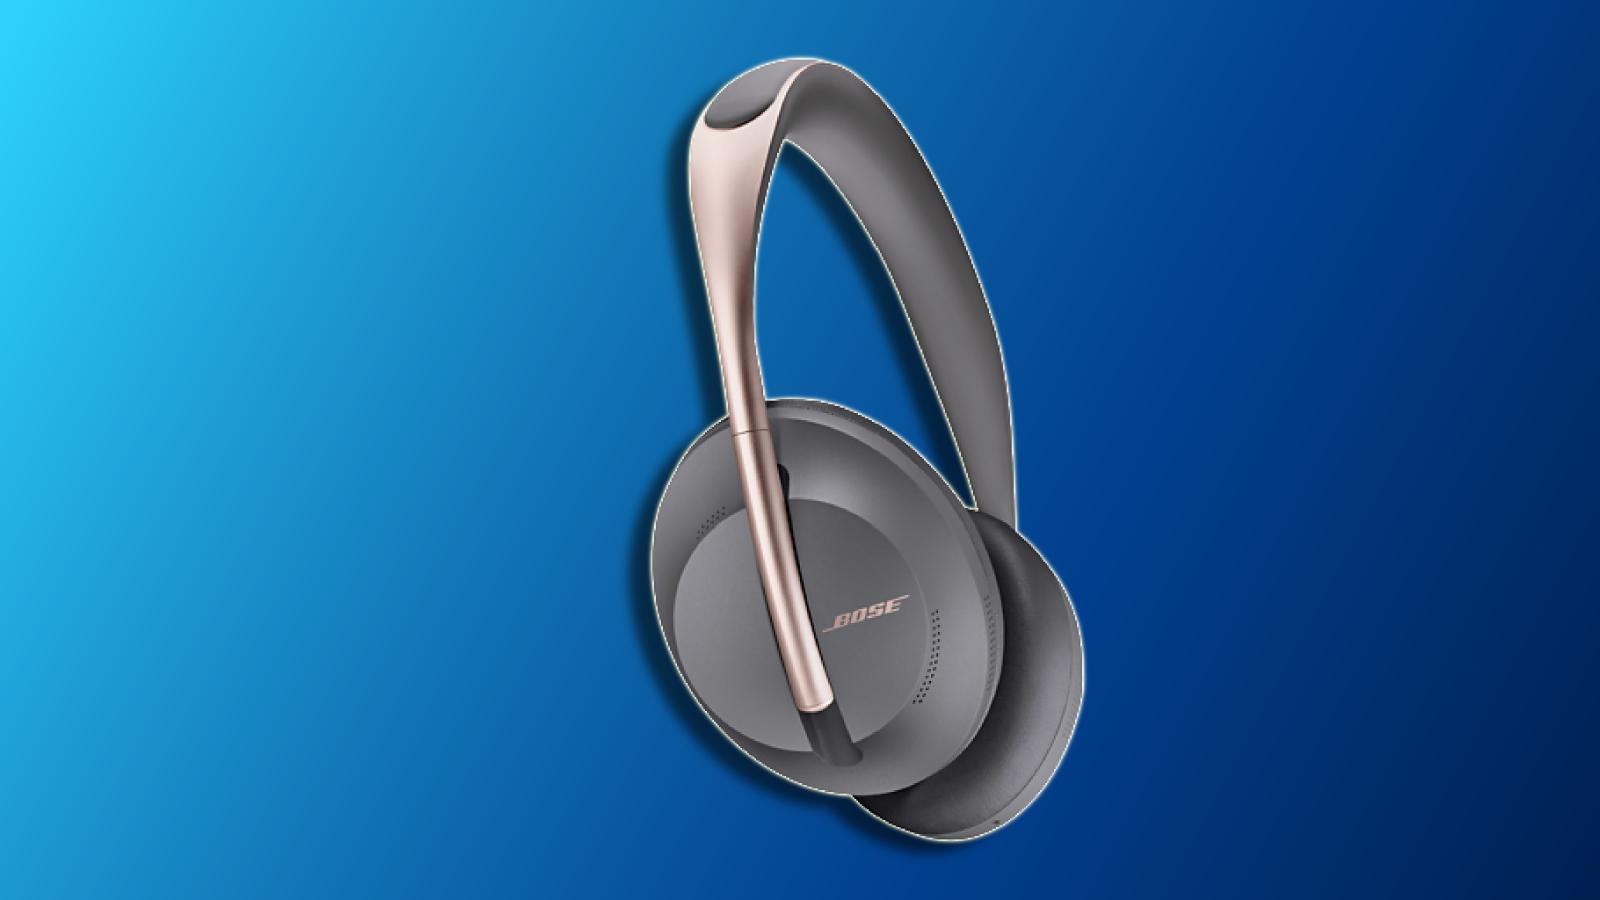 Best noise-canceling headphones- Bose 700 on a gradient background